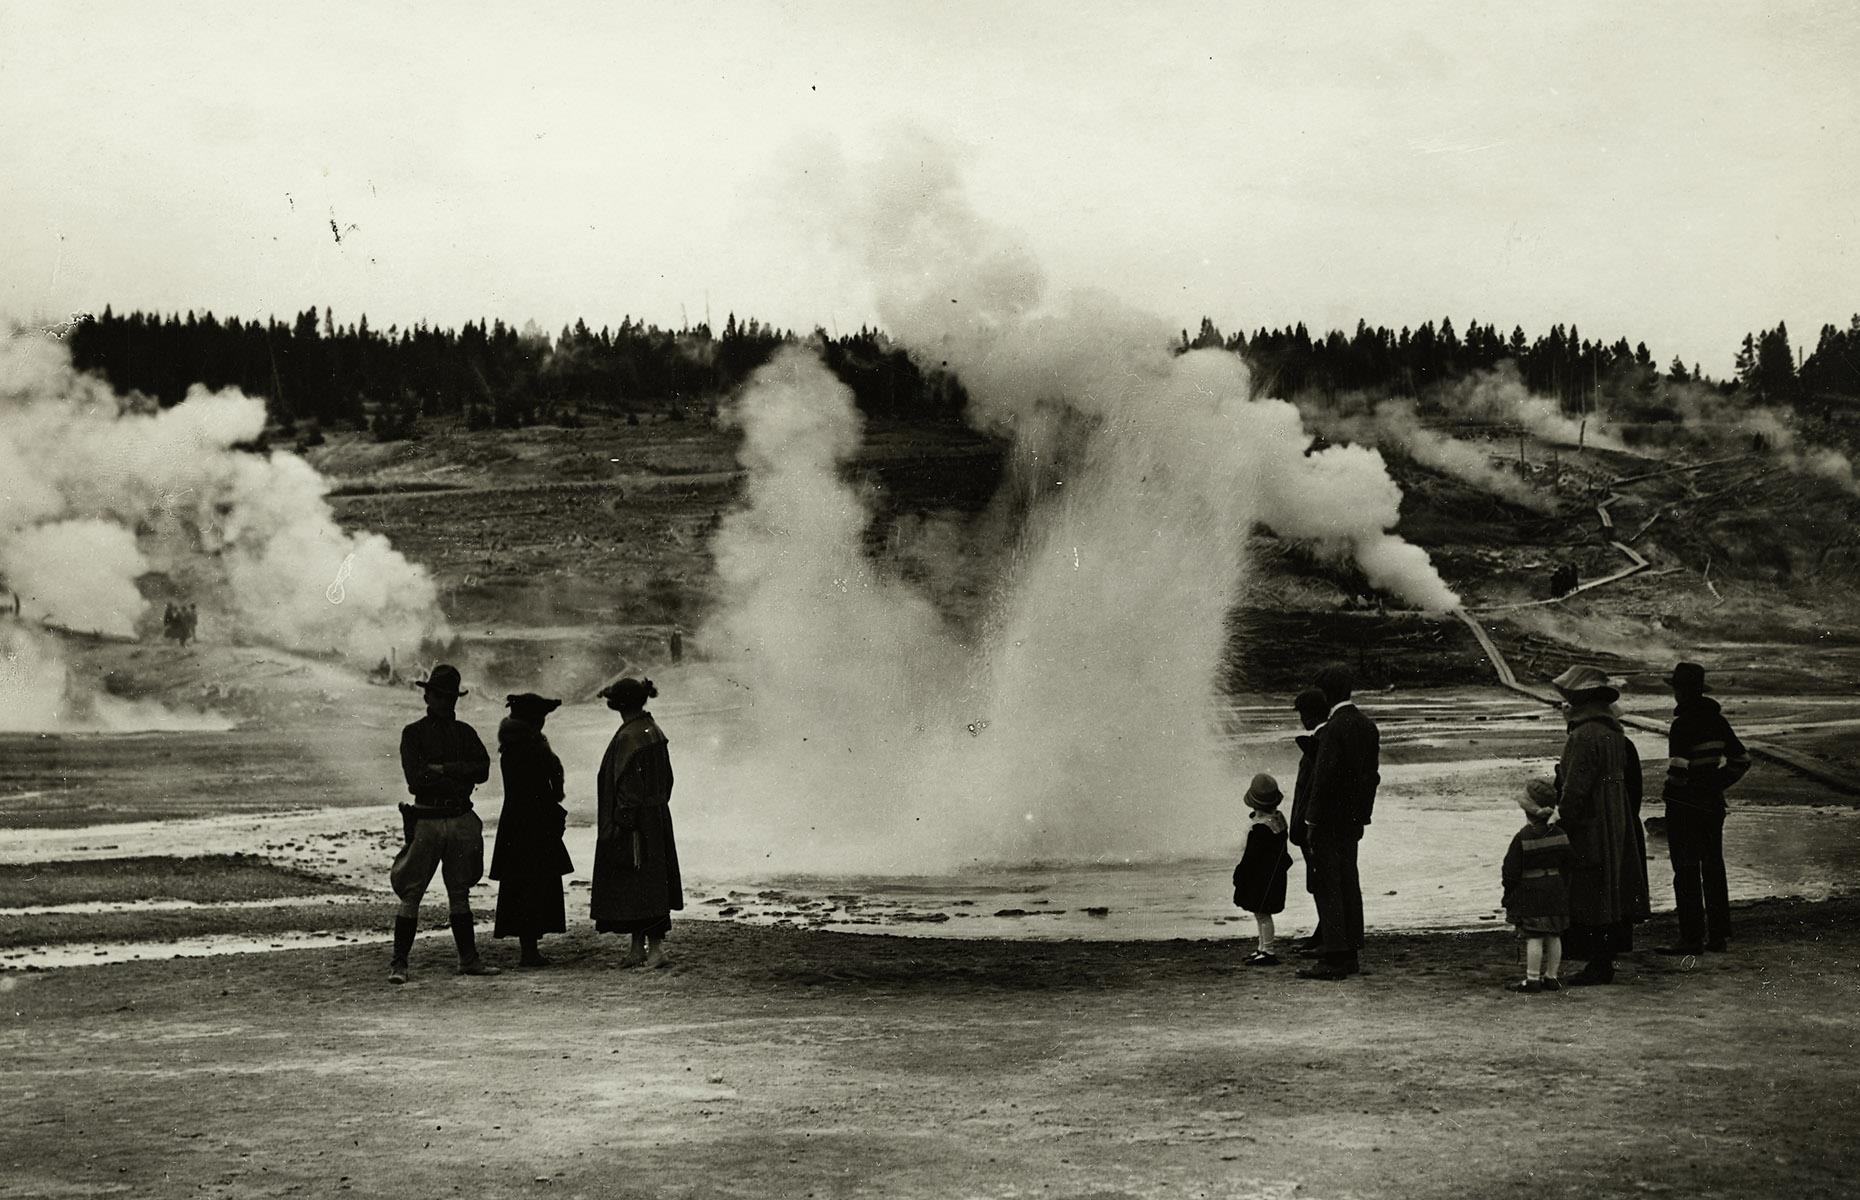 Yellowstone's geothermal wonders were, and still are, a major draw of the park. There are more than 10,000 thermal features enveloped within the site today, from belching mud pots and hot springs to geysers shooting water as high as 300 feet (91m) – that record belongs to Steamboat Geyser. Here, visitors from 1920 look on in awe as they explore one of Yellowstone's steaming geyser basins.